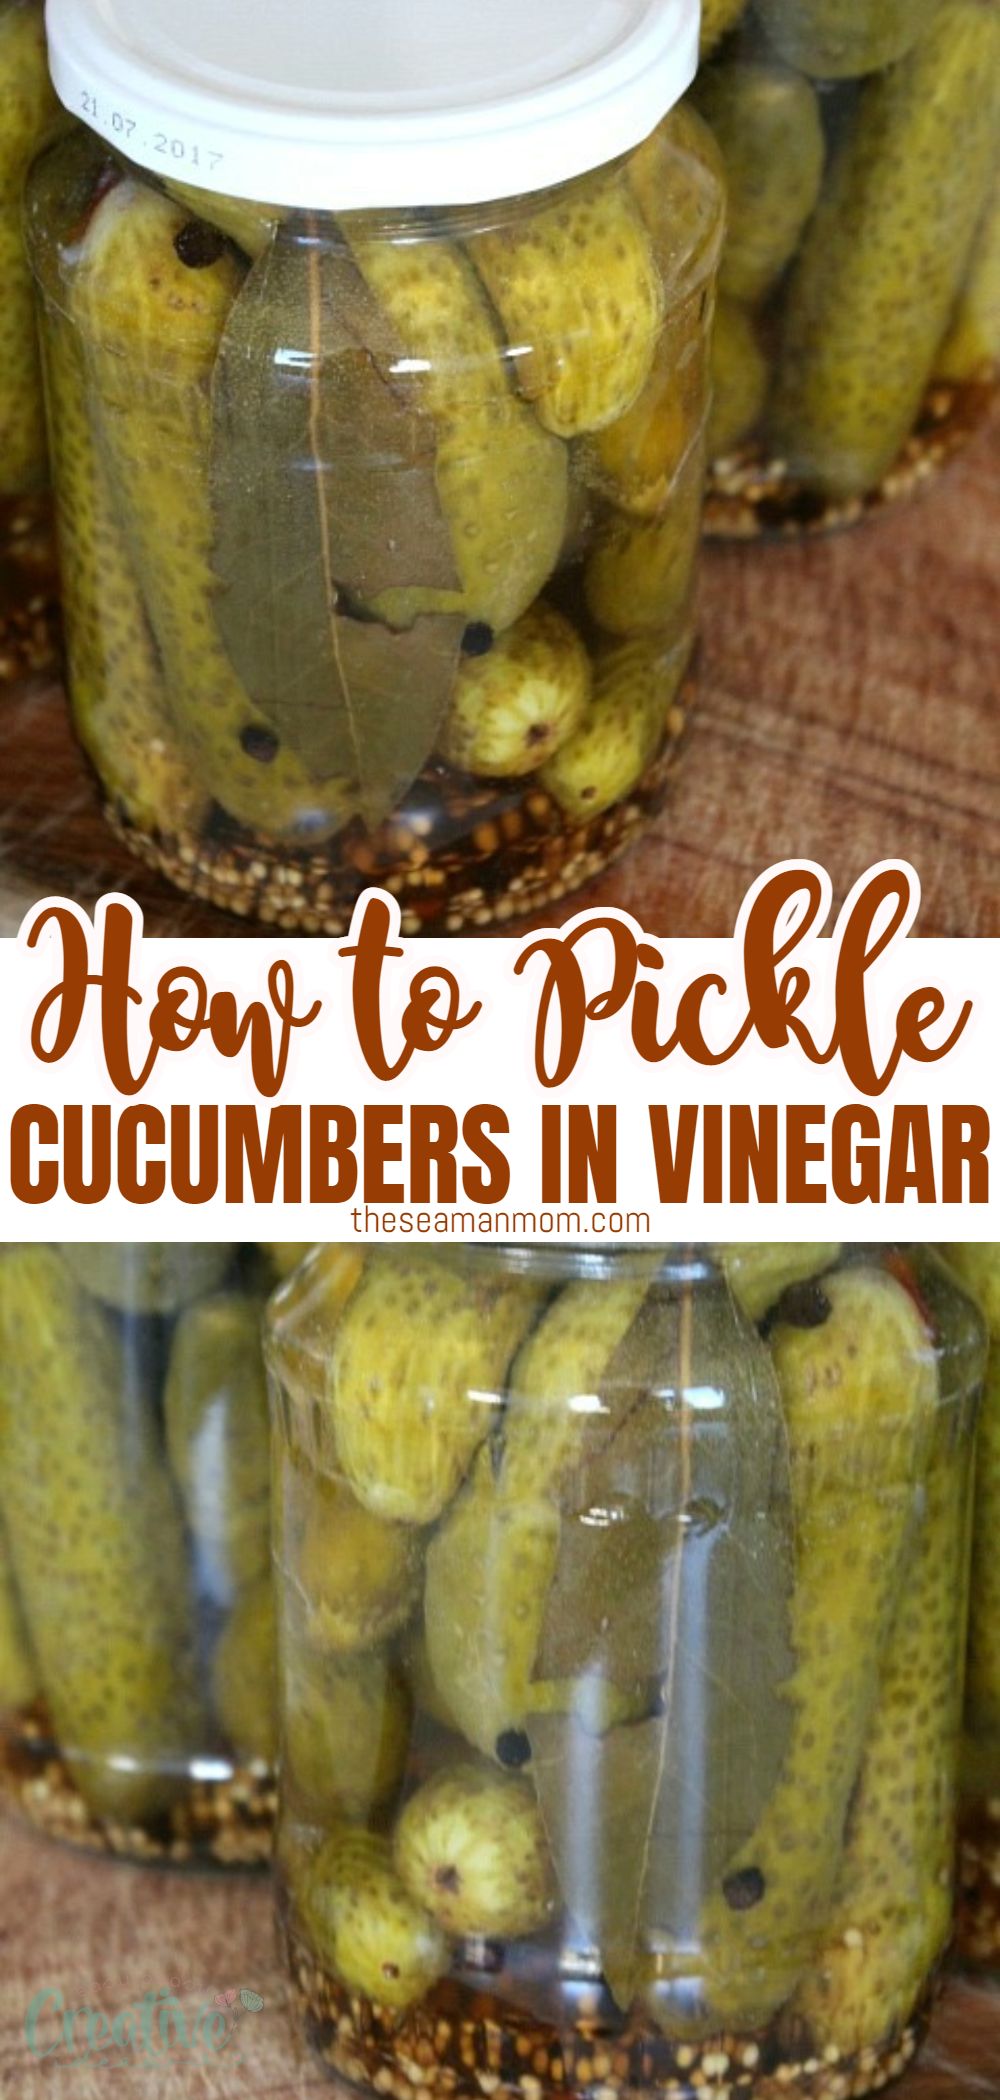 Pickled cucumbers are great to serve next to a steak, a stew or in burgers. Learn how to pickle cucumbers at home with this very easy, family recipe! via @petroneagu